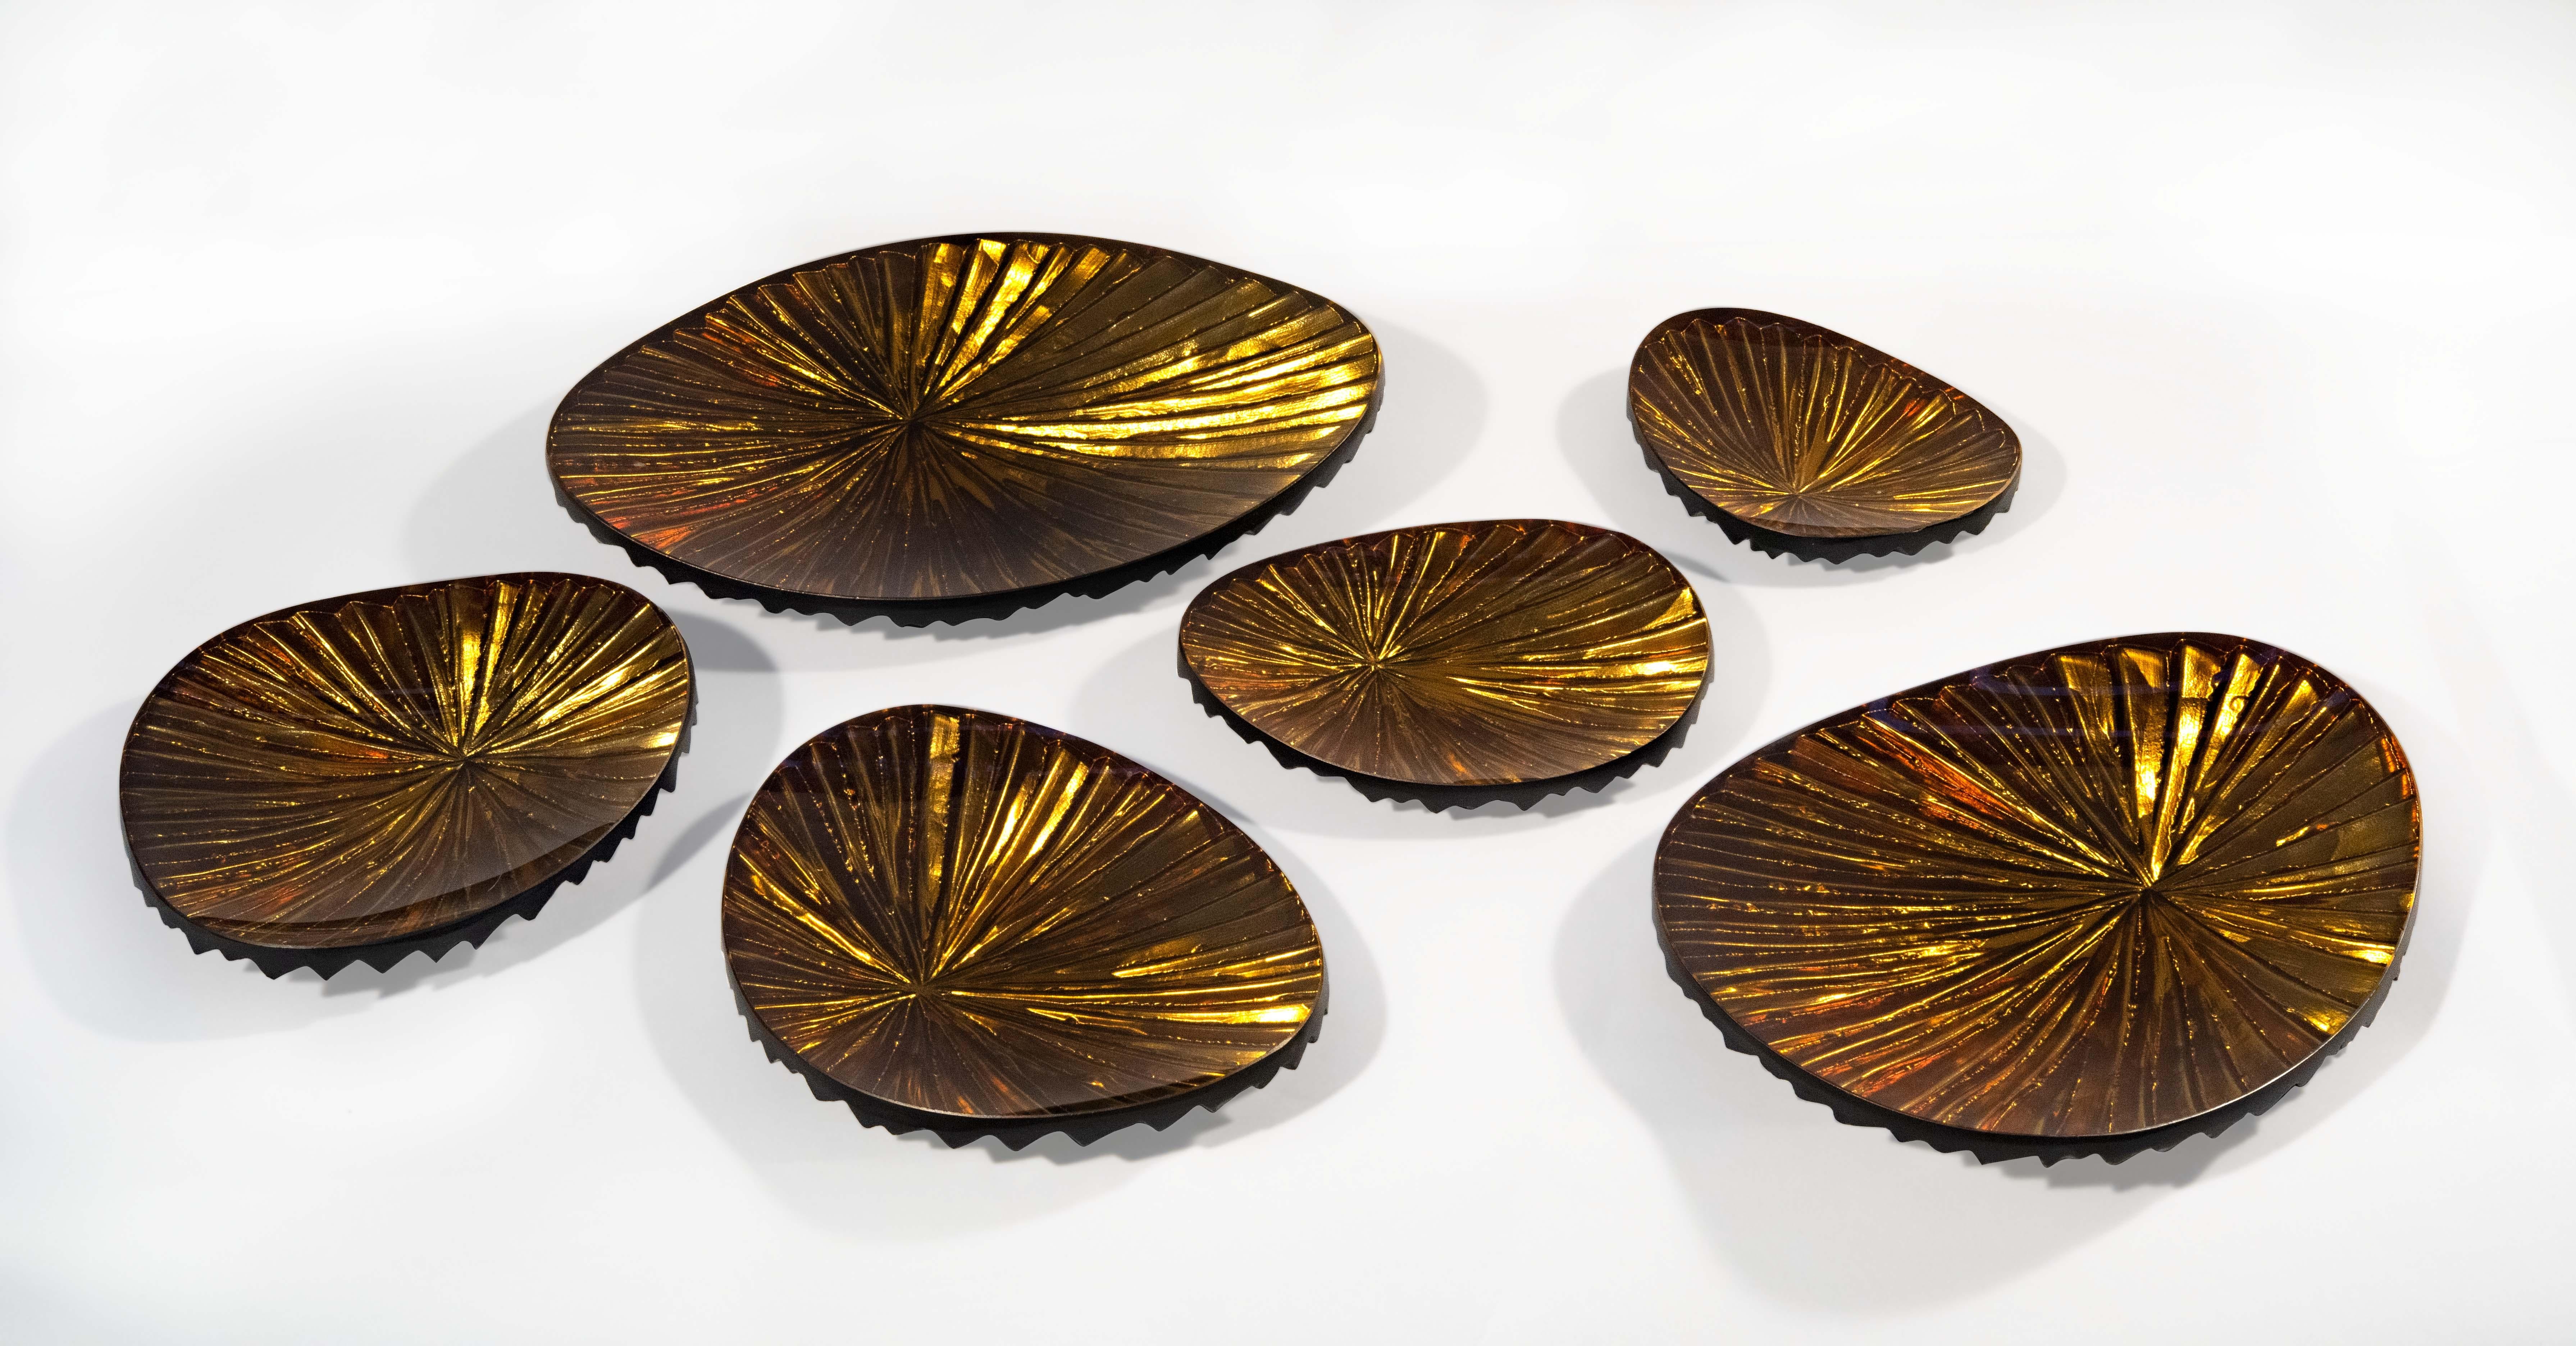 Glass Contemporary 'Oasi' Set of Six Crystal Bowls Amber and Gold by Ghirò Studio For Sale